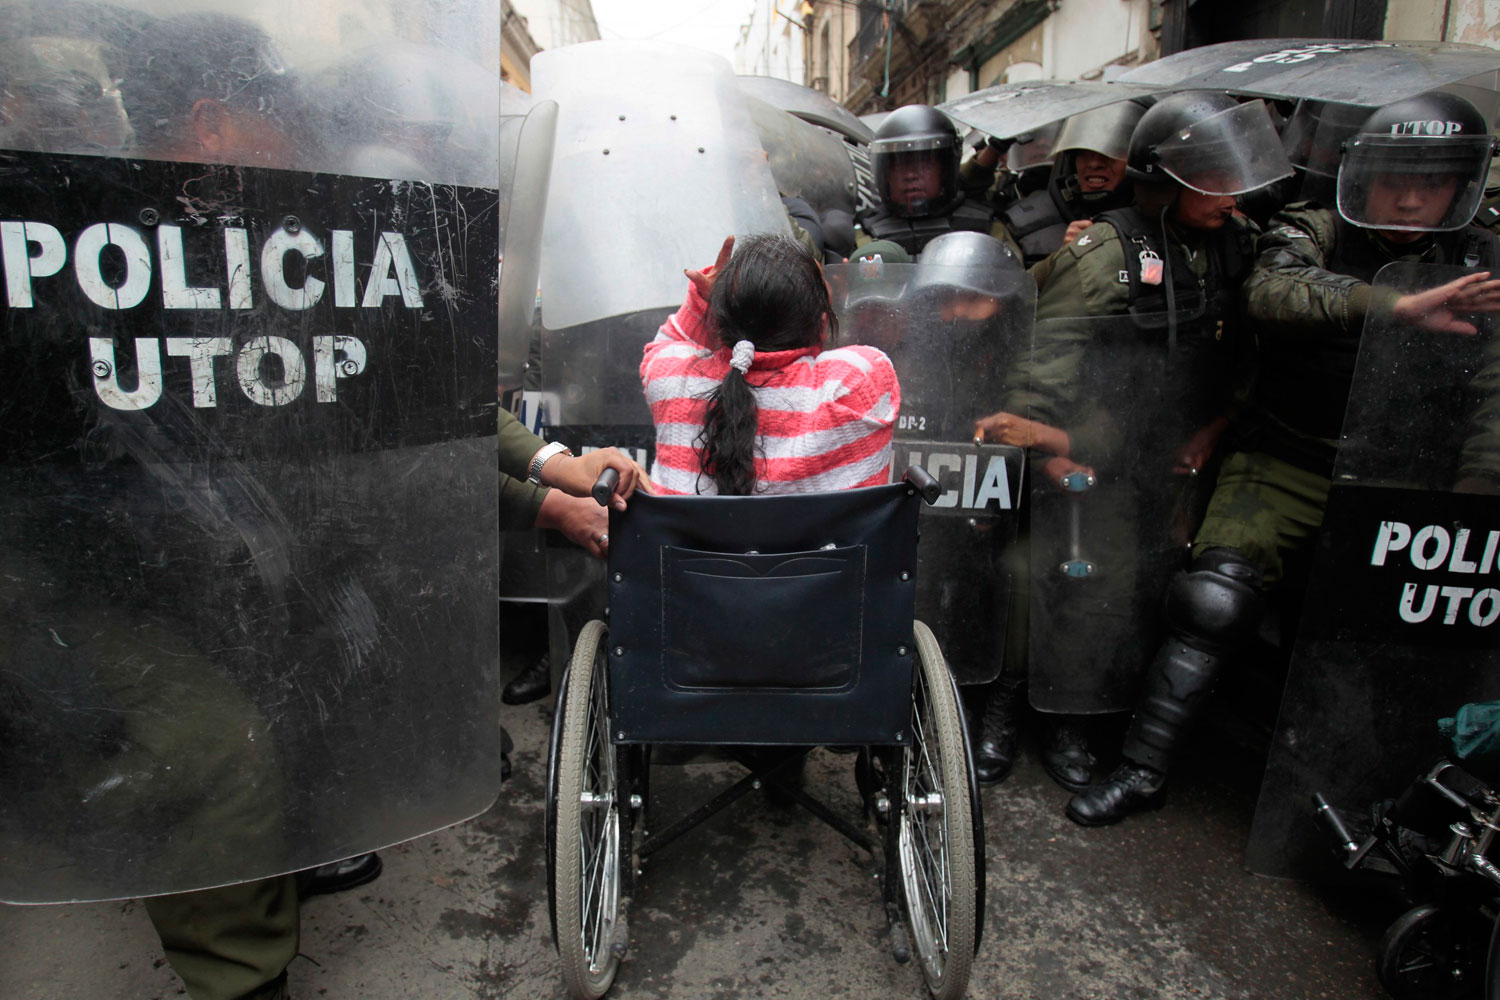 Feb. 23, 2012. A physically disabled woman on her wheelchair clashes with riot police in the centre of La Paz. Hundreds of physically disabled people arrived in La Paz on Thursday after completing a protest march of some 1600 km (994 miles) over a hundred days to demand that Bolivia's government offer support in the form of 3000 bolivianos ($434) payment to each physically disabled Bolivian, according to local media.